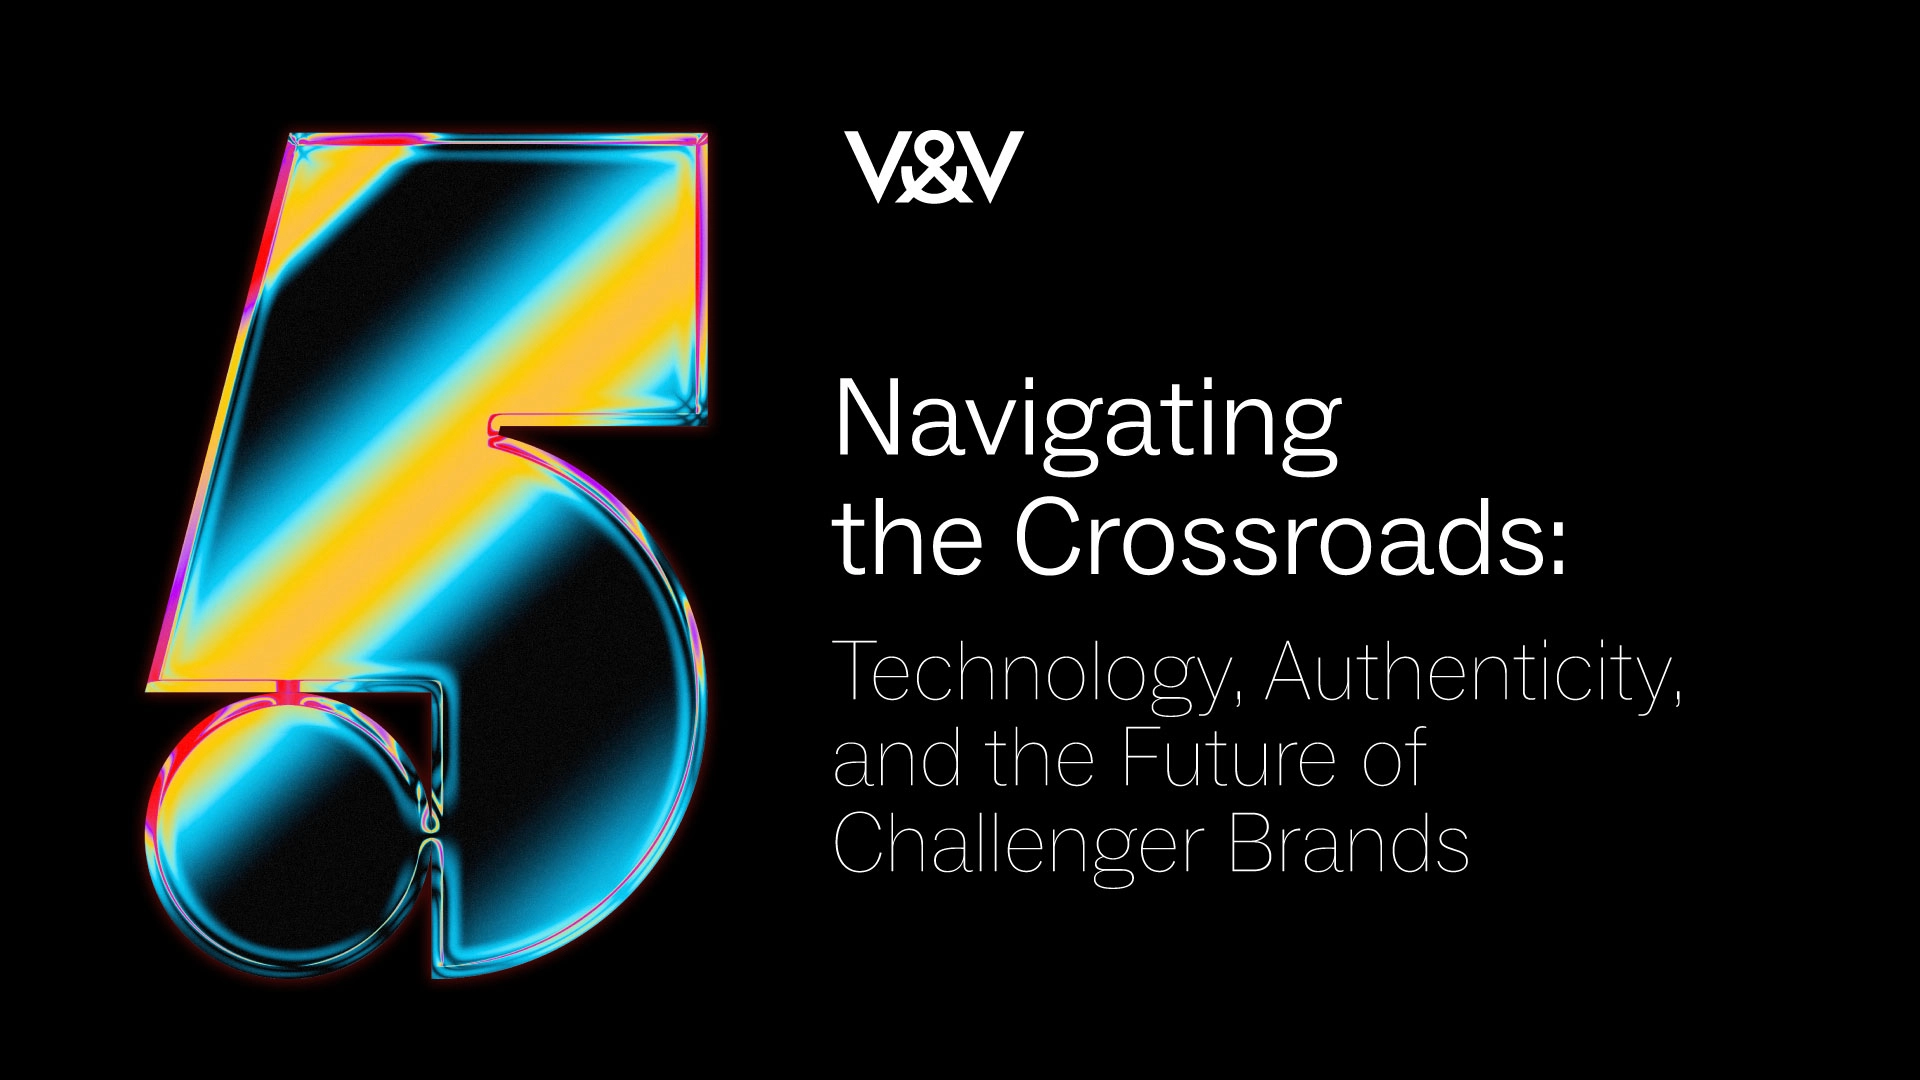 Technology, Authenticity, and the Future of Challenger Brands in 2024